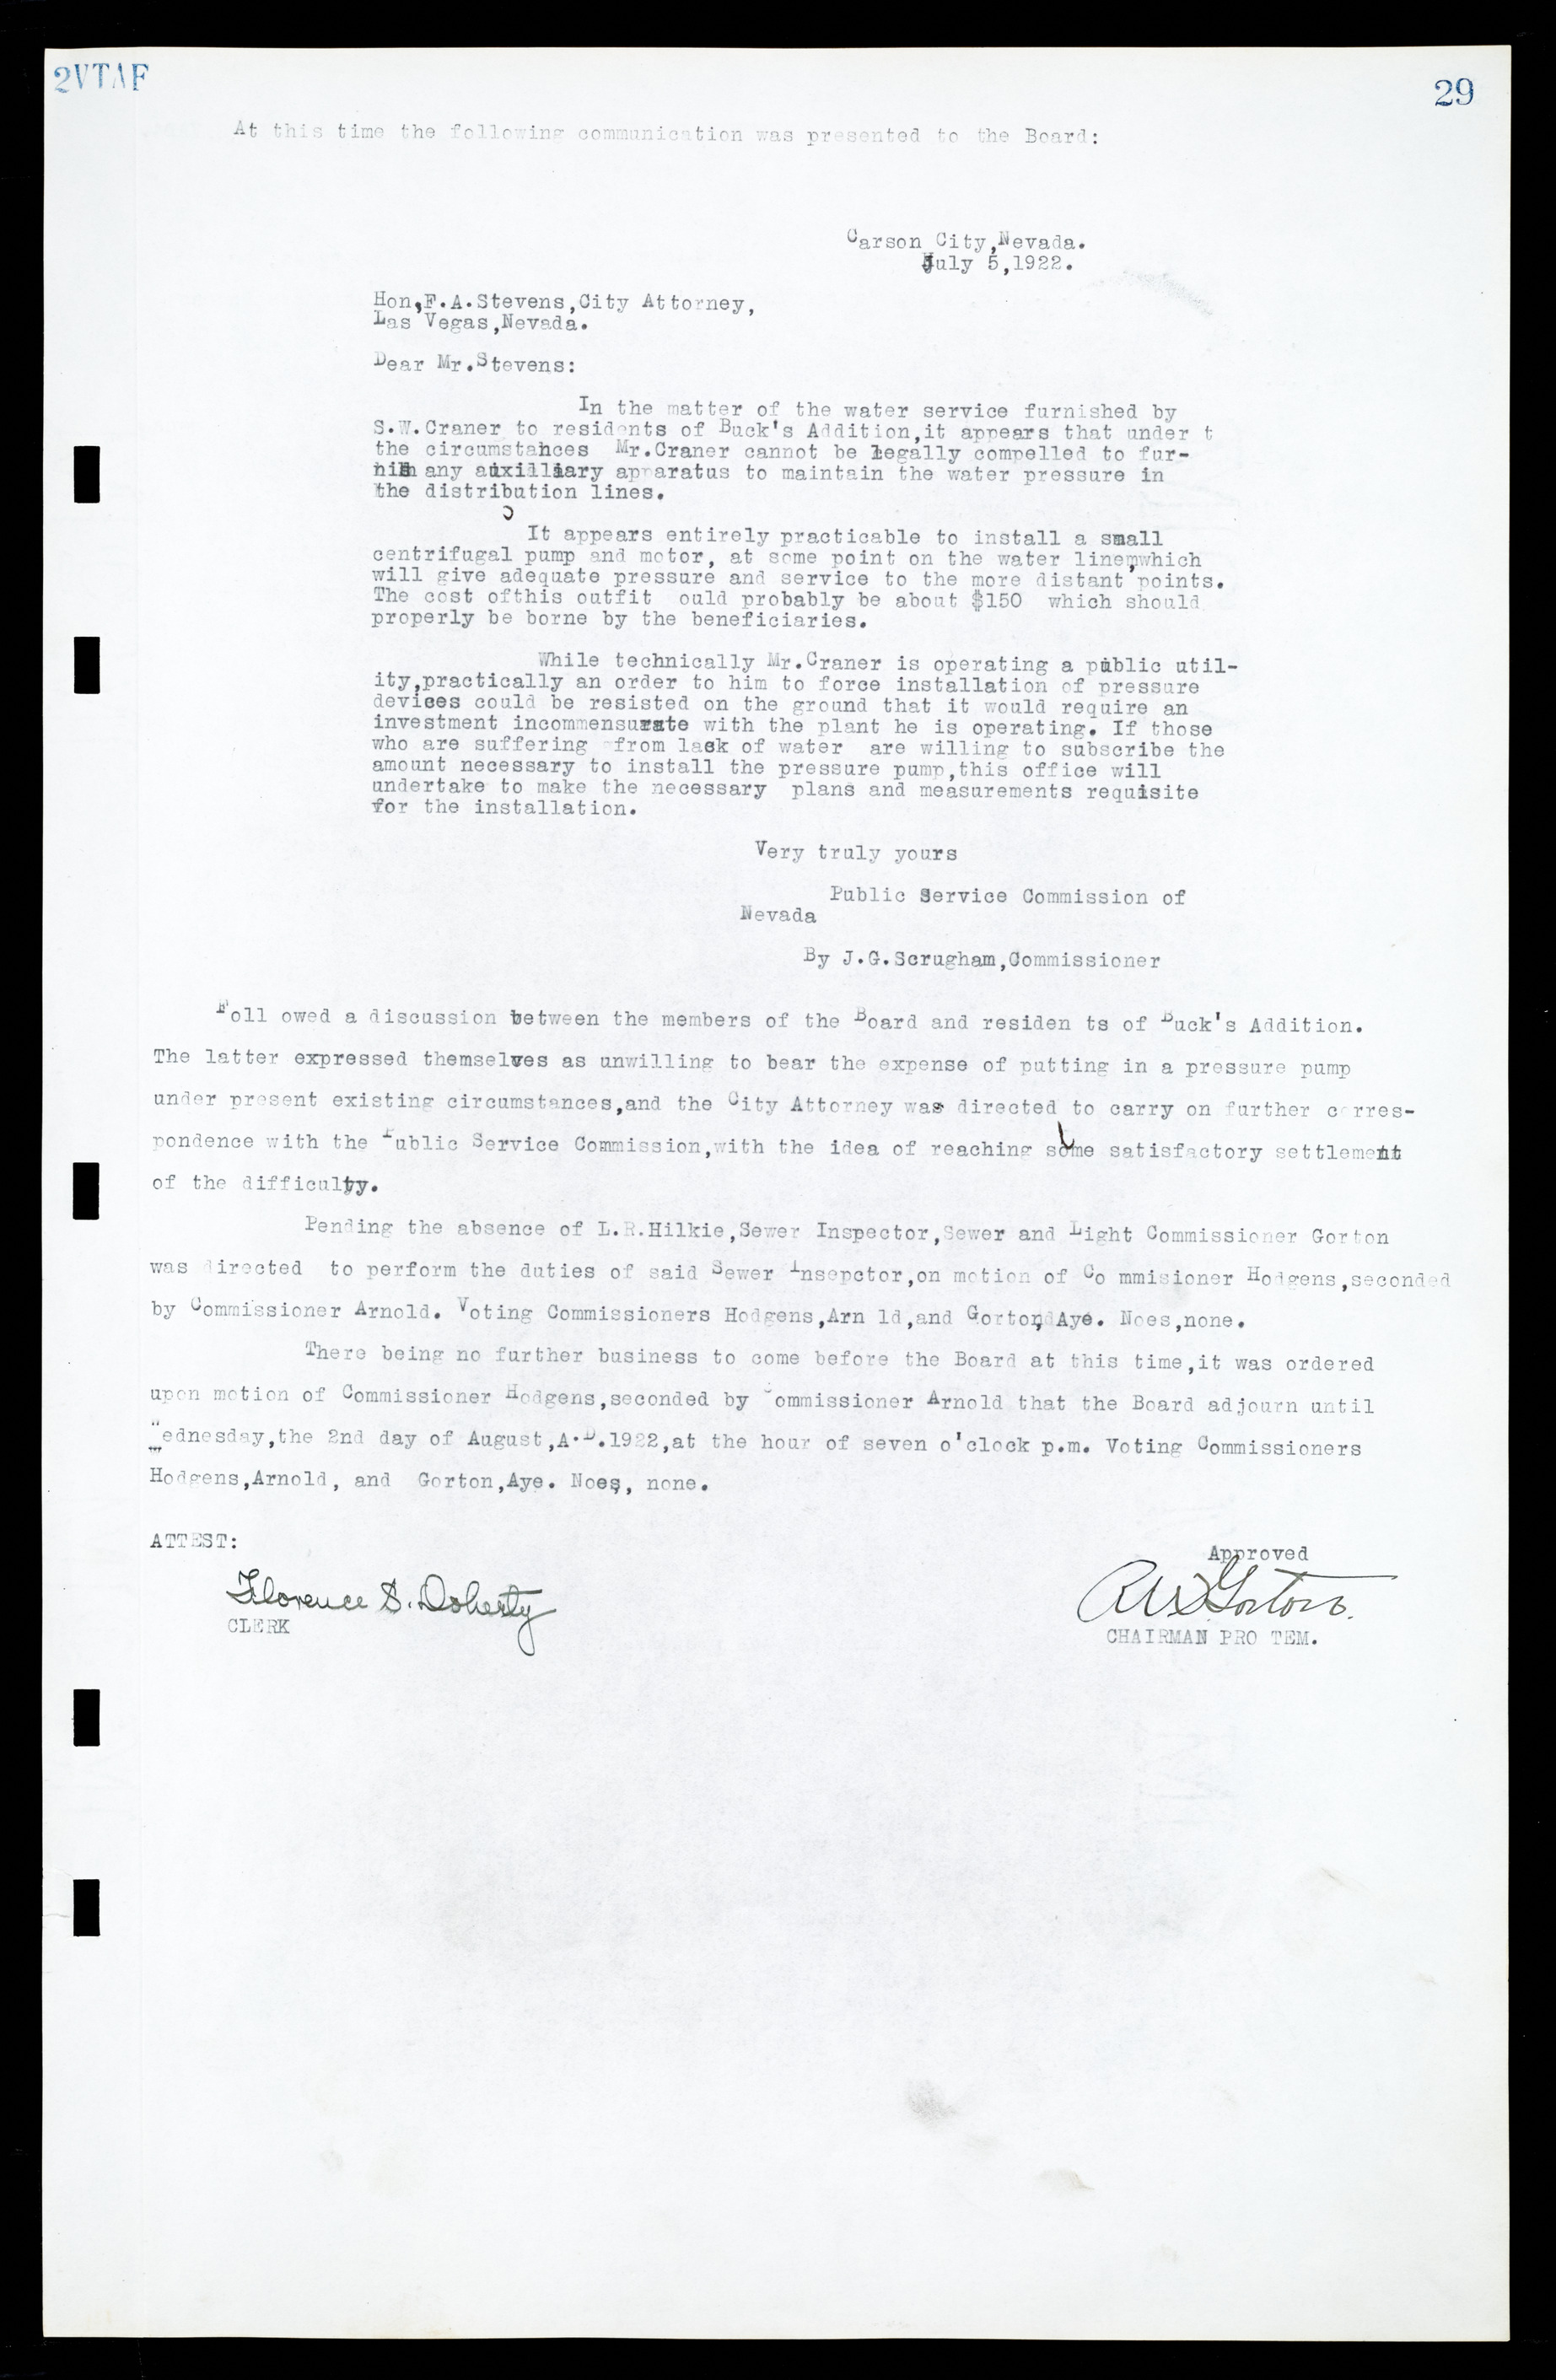 Las Vegas City Commission Minutes, March 1, 1922 to May 10, 1929, lvc000002-36